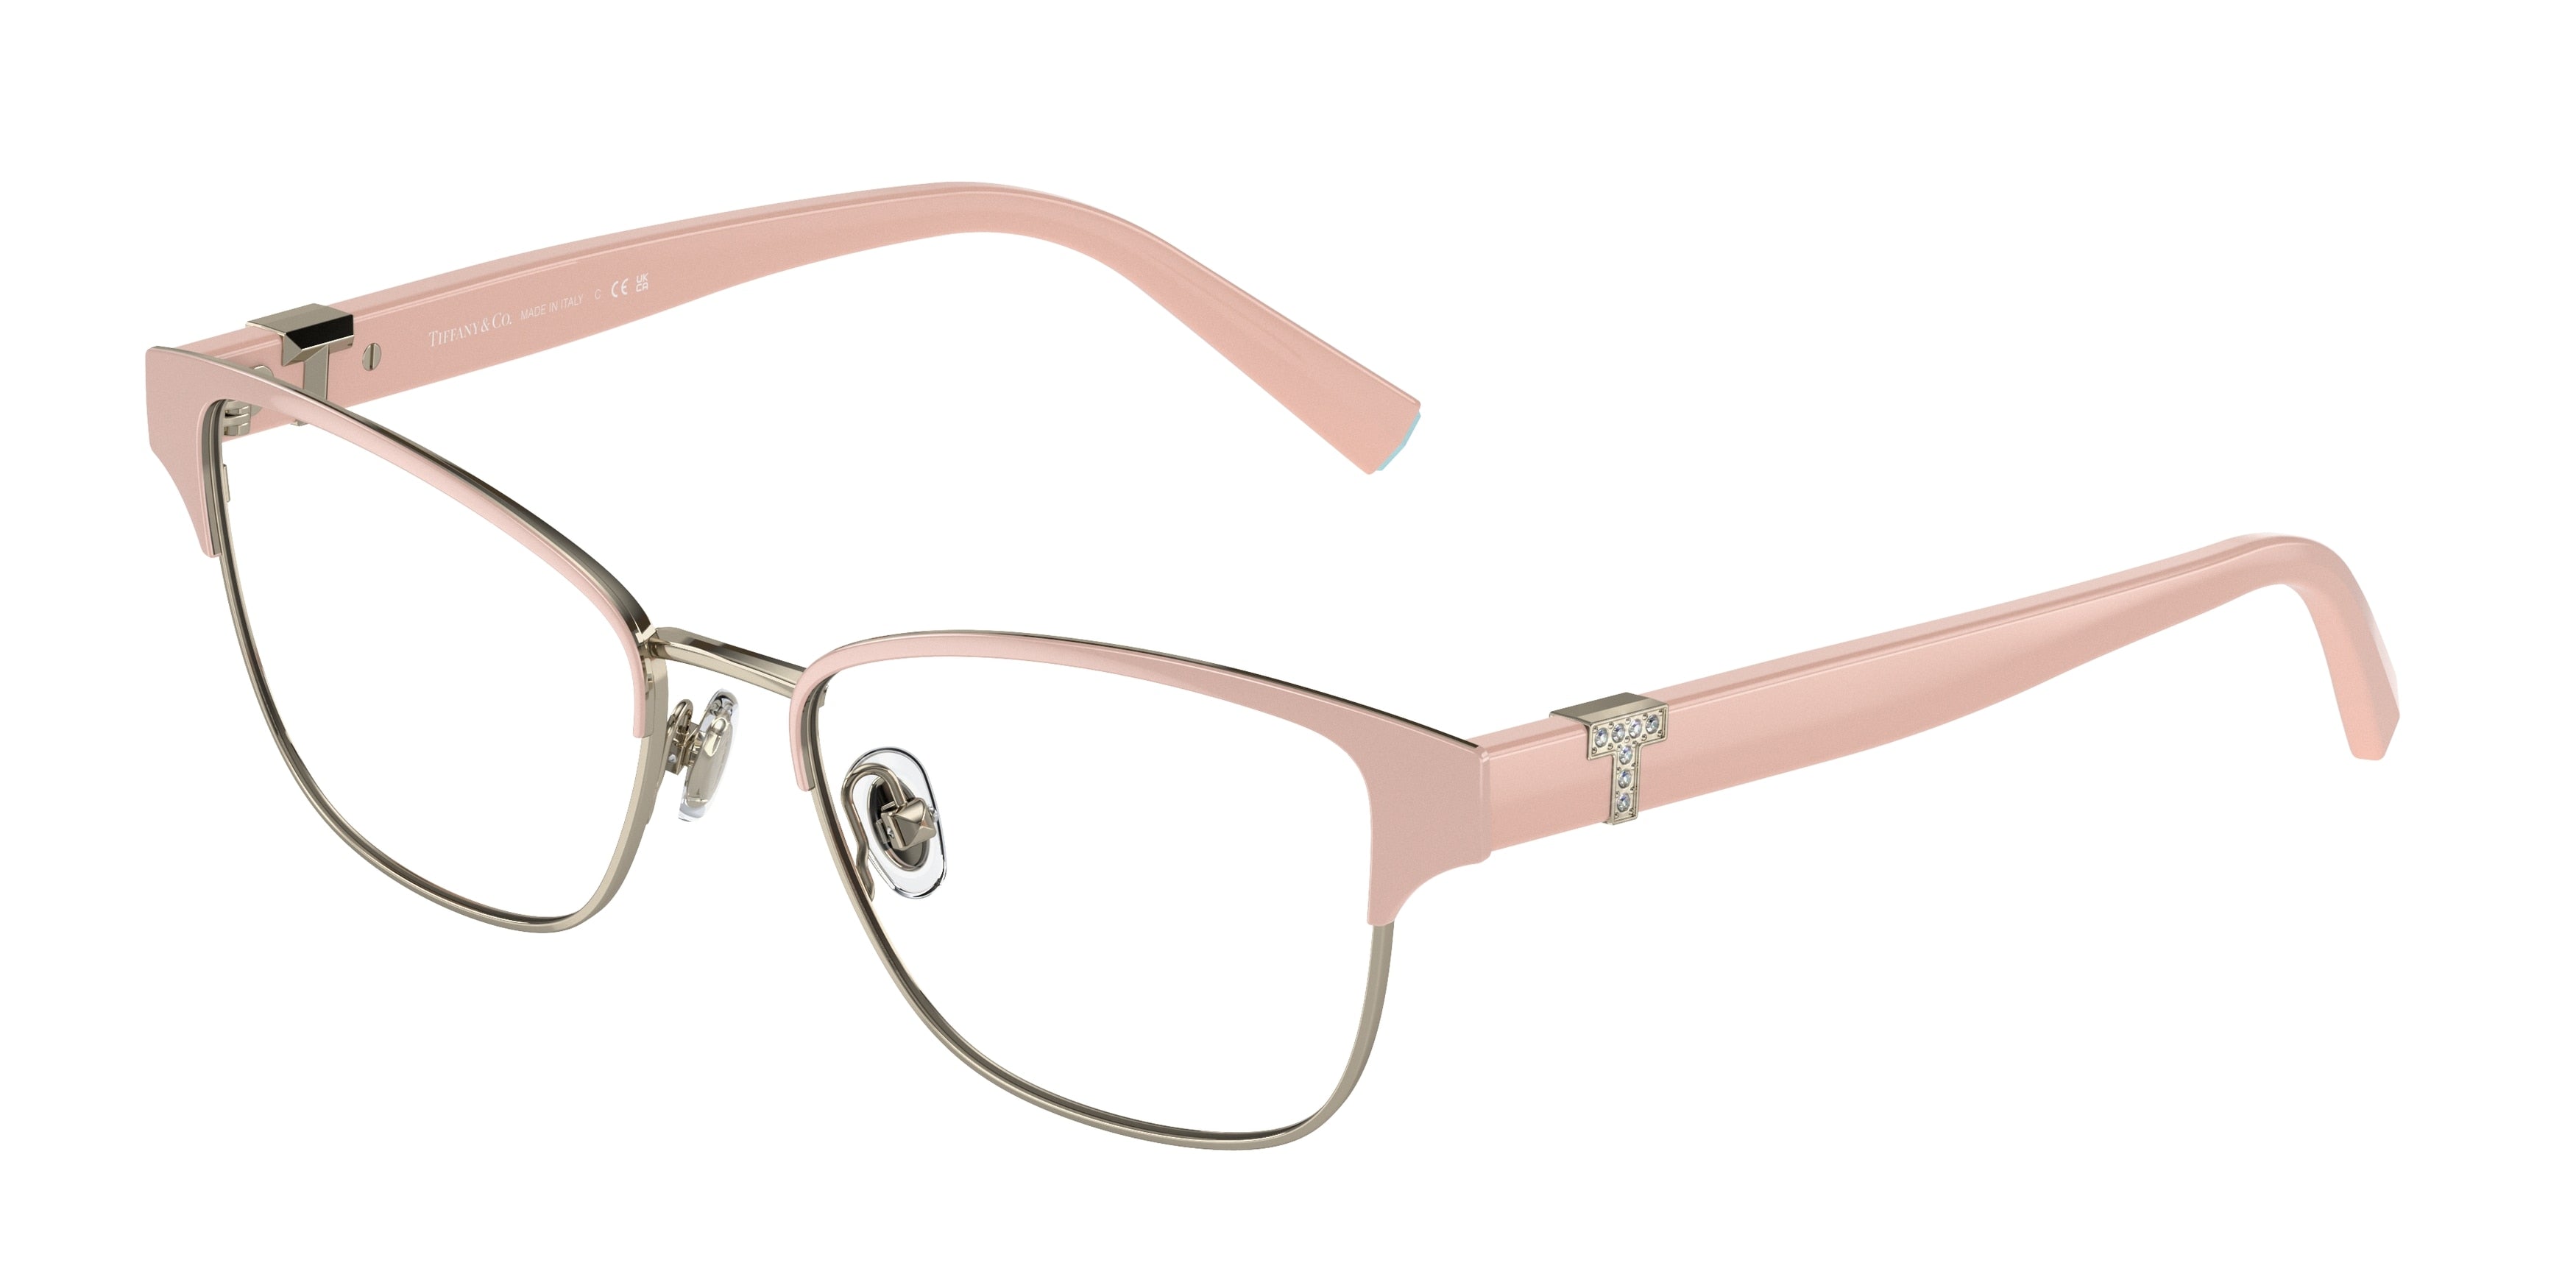 Tiffany TF1152B Cat Eye Eyeglasses  6186-Cloud Pink On Pale Gold 52-140-16 - Color Map Pink